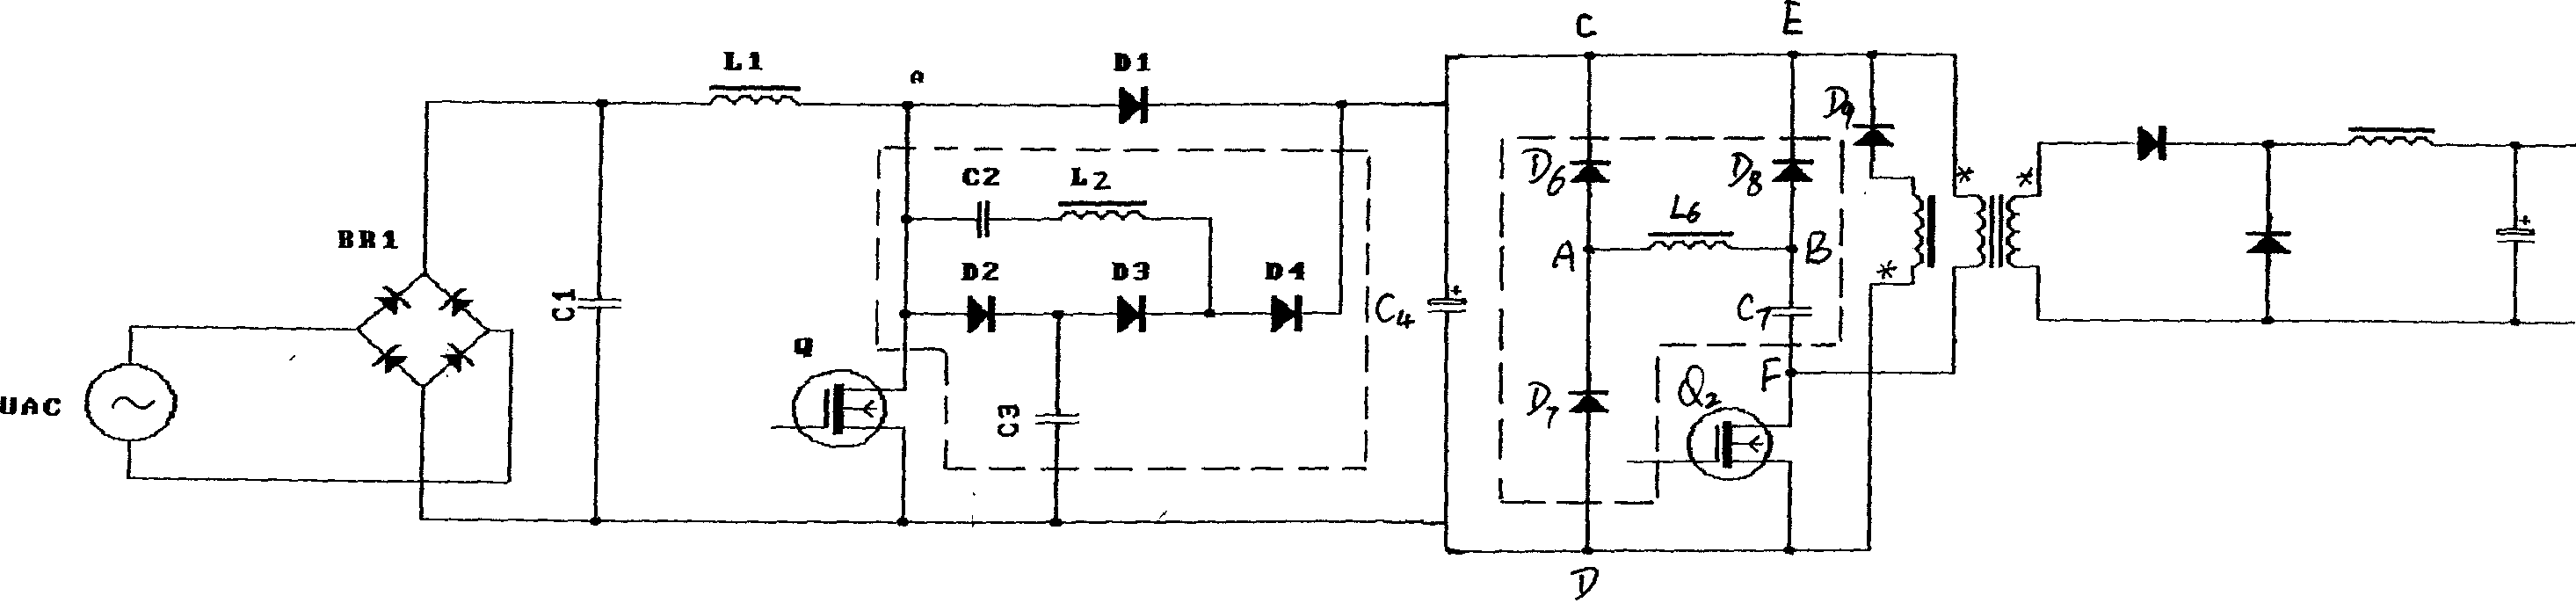 Soft switching circuit without absorption loss